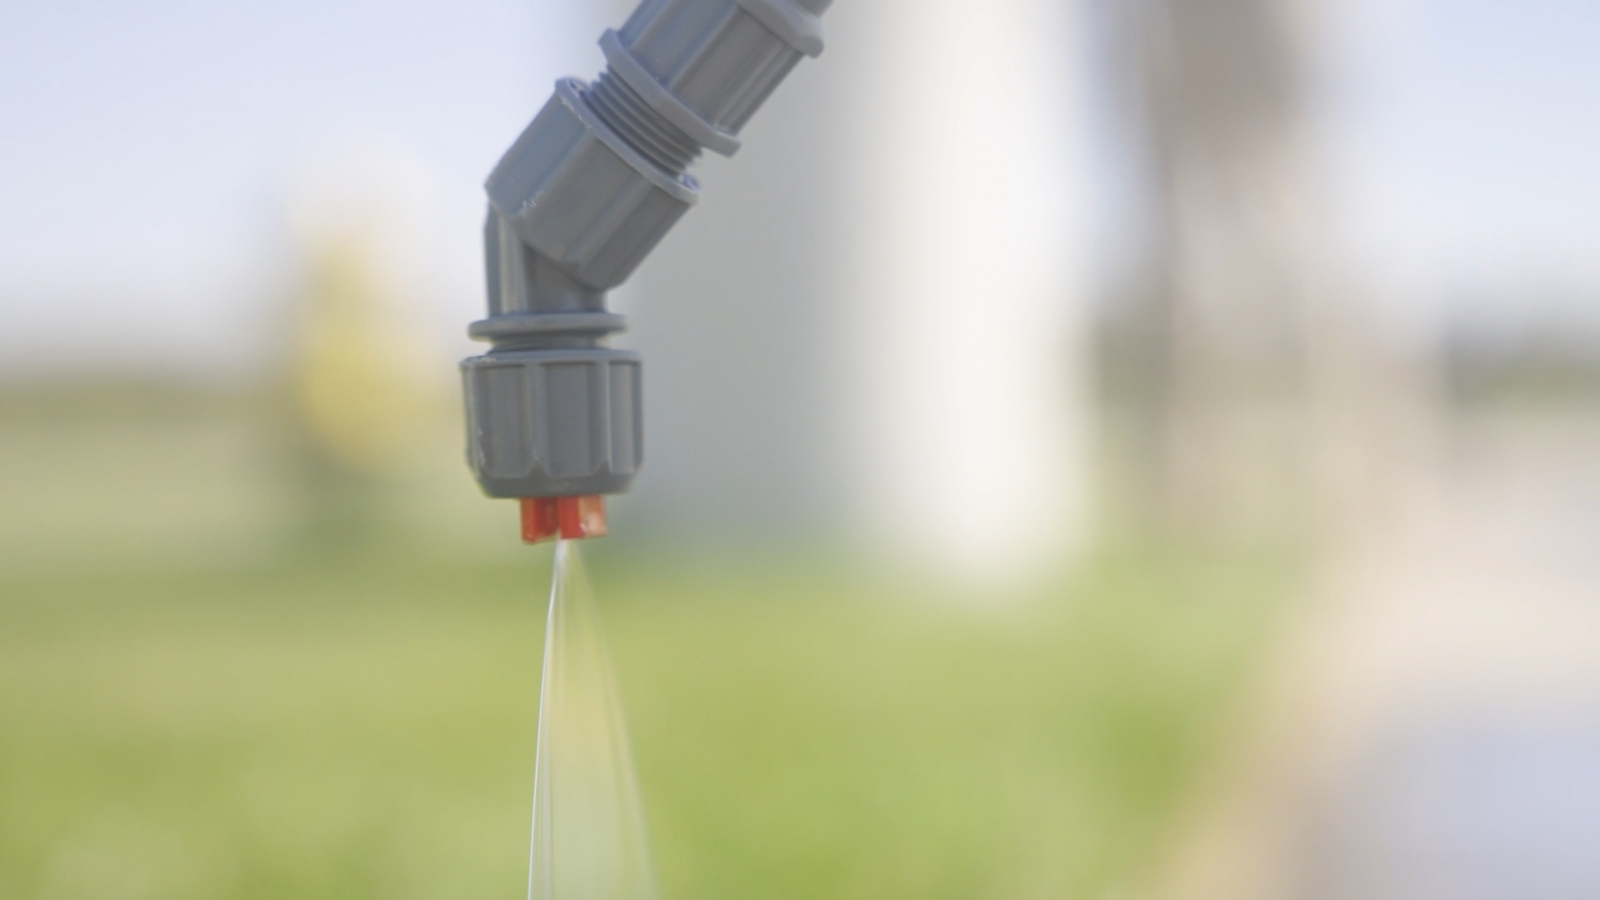 closeup image of sprayer nozzle with liquid spraying out, set against a background of blurred grass and farm silo.